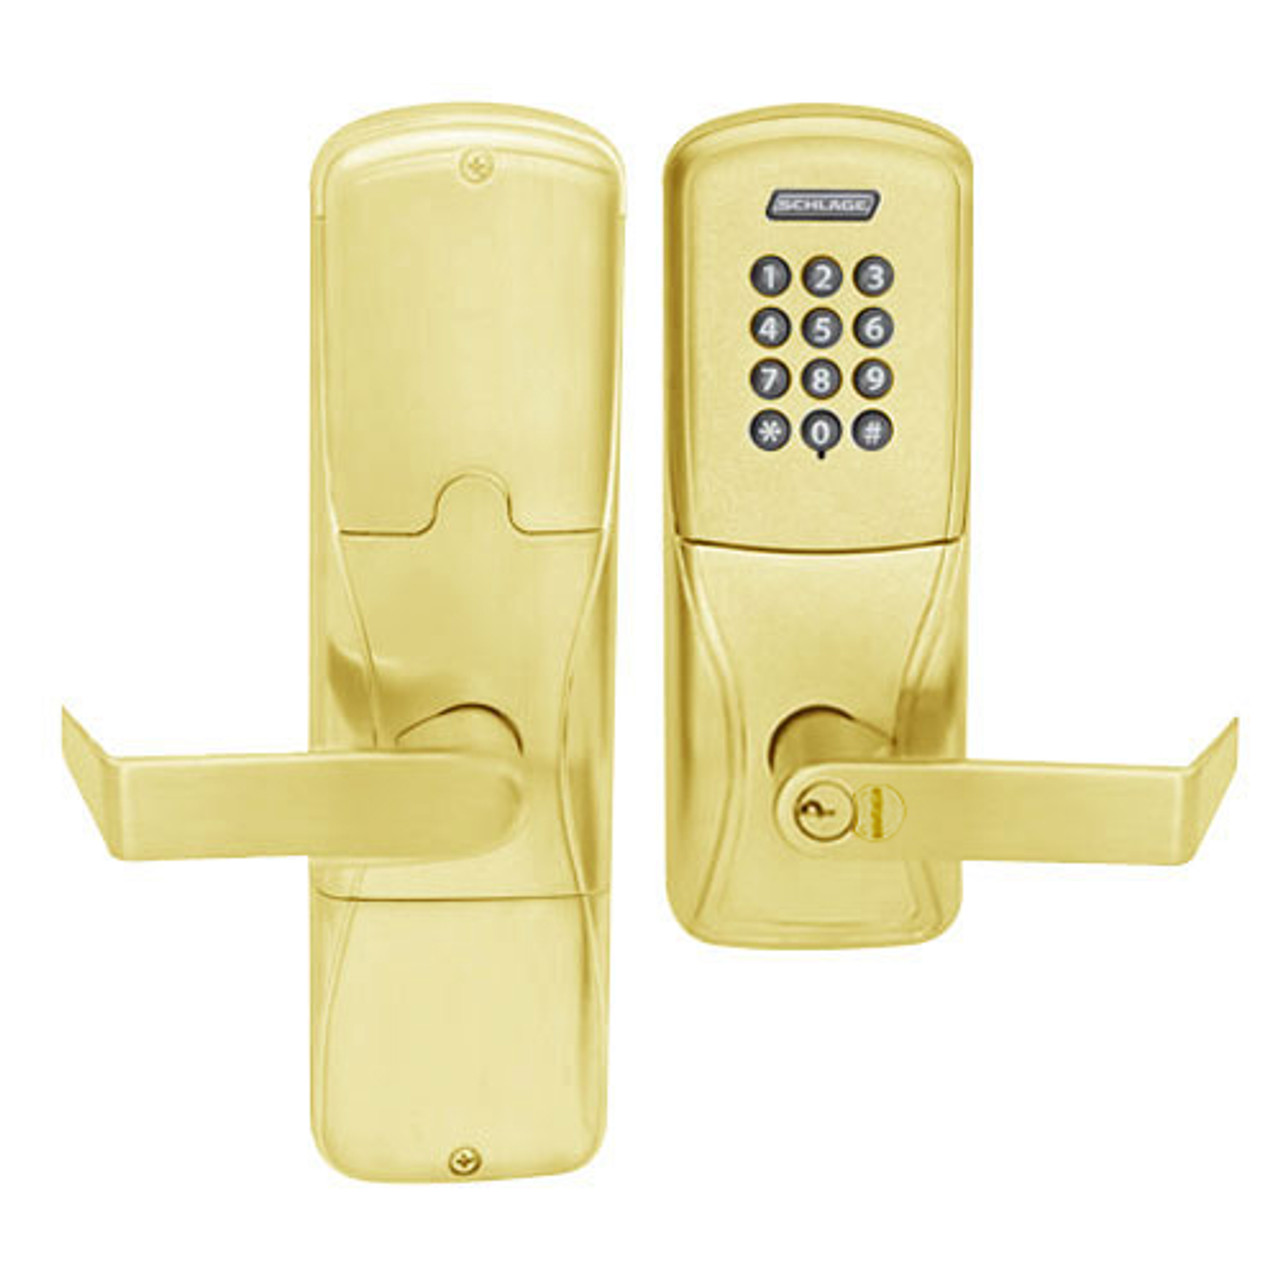 AD200-MD-60-KP-RHO-RD-605 Schlage Apartment Mortise Deadbolt Keypad Lock with Rhodes Lever in Bright Brass